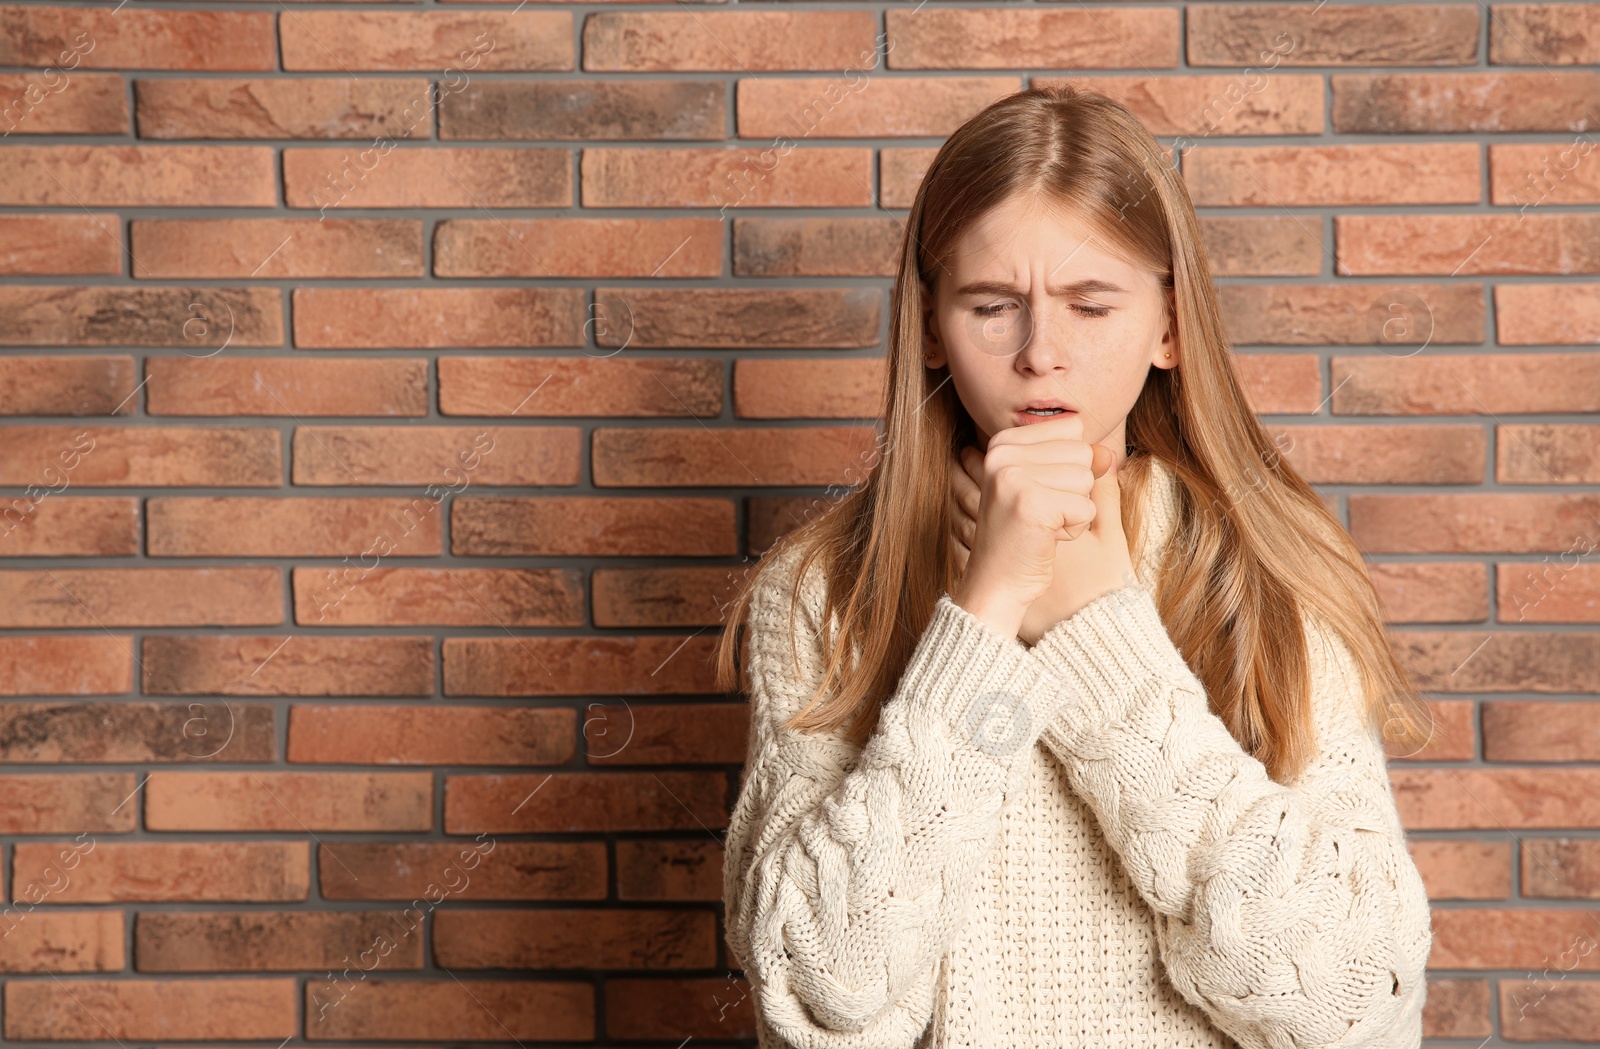 Photo of Teenage girl suffering from cough near brick wall. Space for text